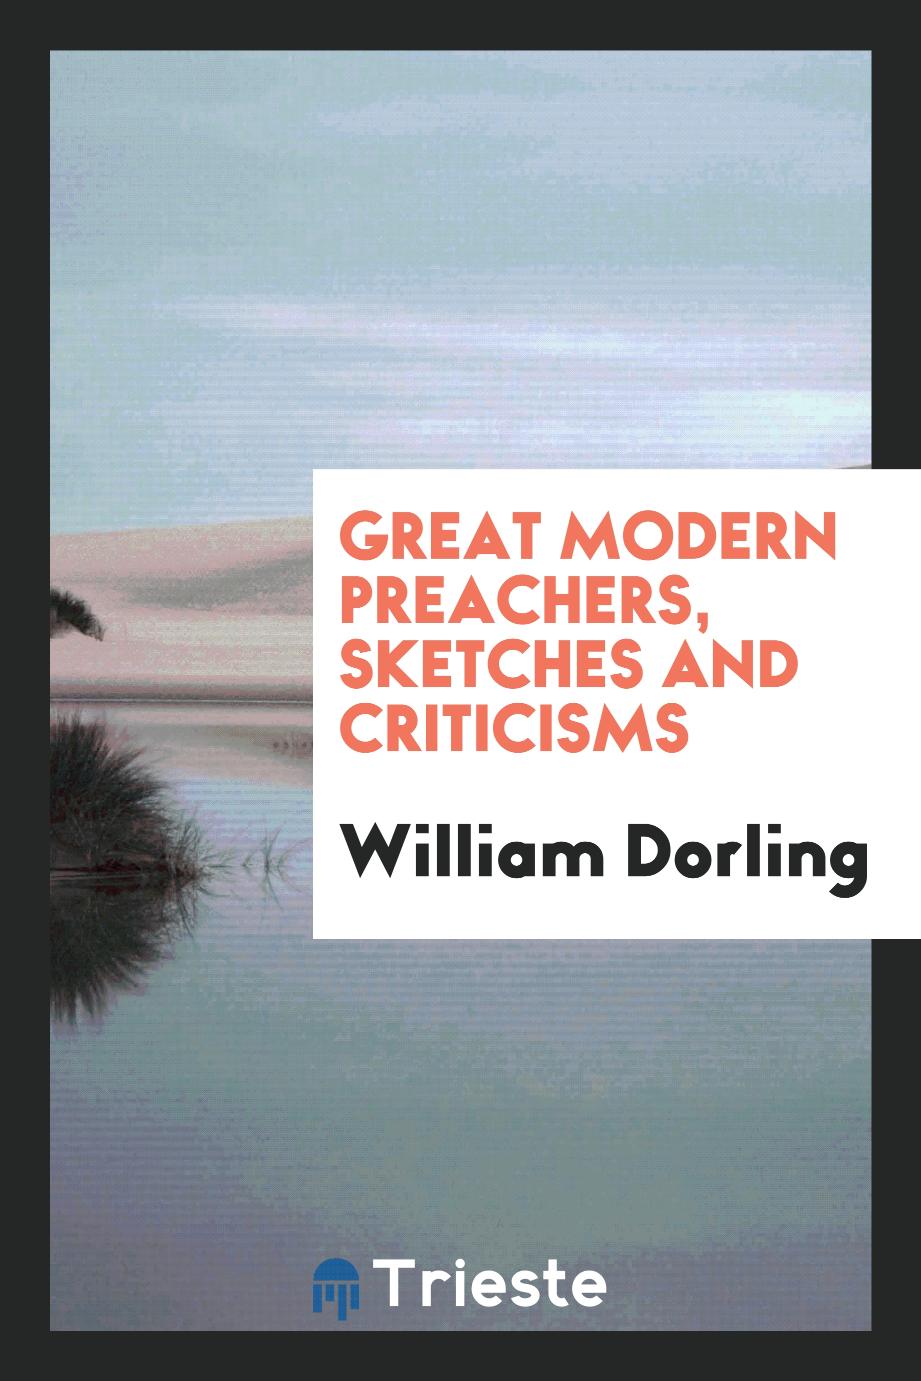 Great Modern Preachers, Sketches and Criticisms